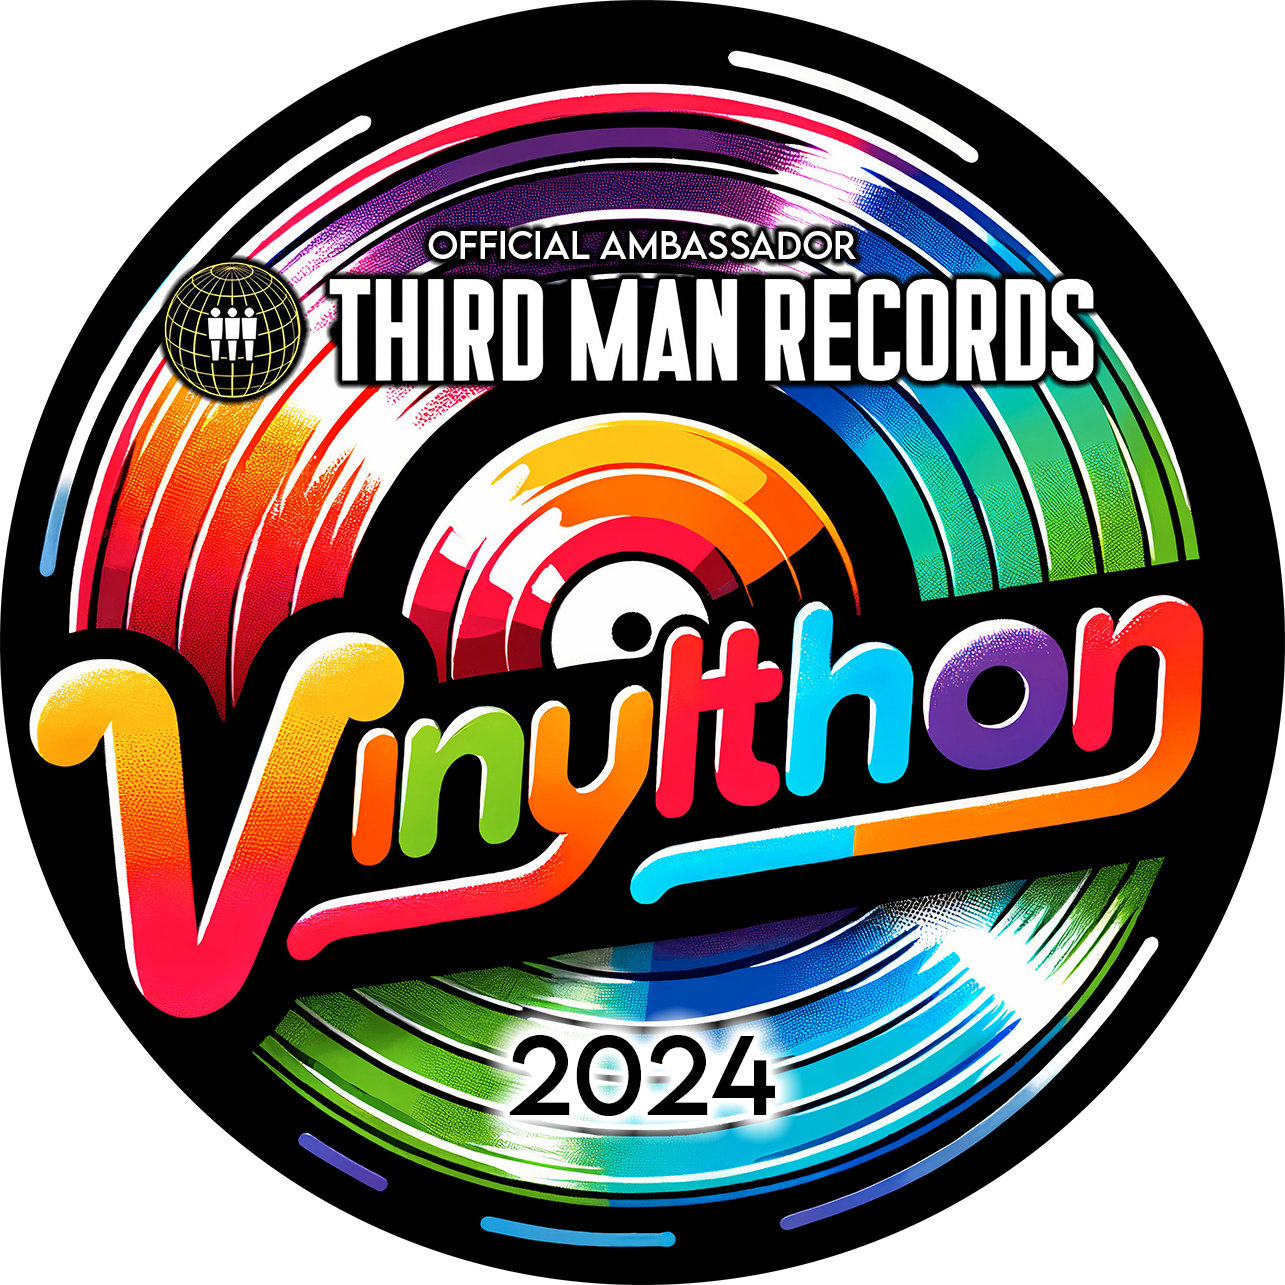 Vinylthon 2024 Coming THIS WEEKEND, April 20 & 21, On 200+ Radio Stations- Third Man Records Announced as Ambassador